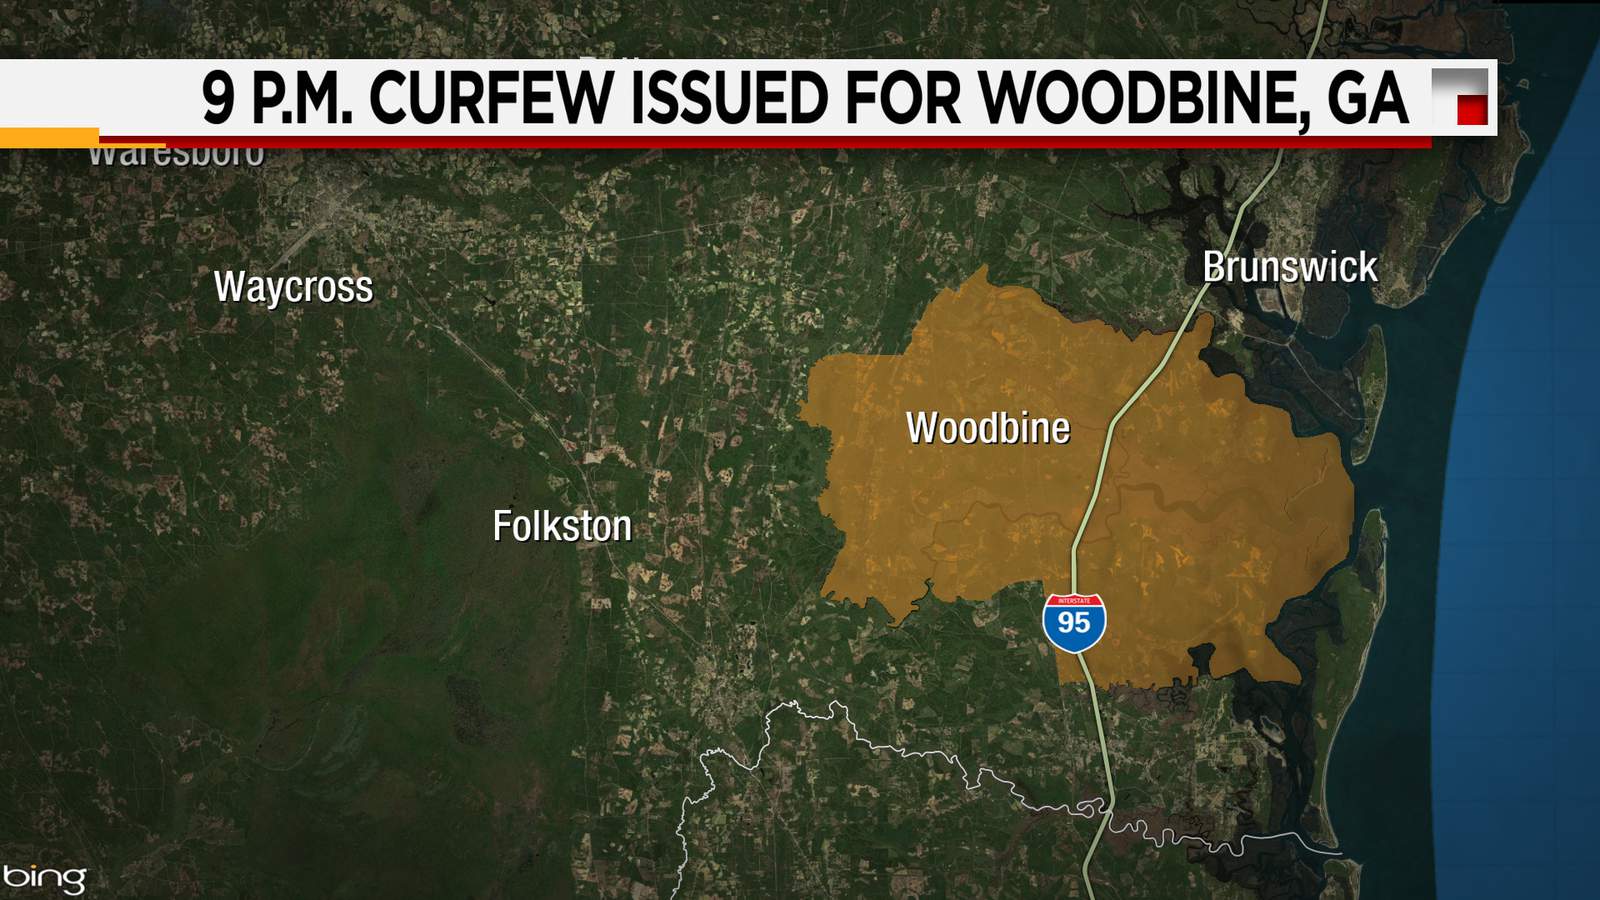 Curfew issued for City of Woodbine starting at 9 p.m.